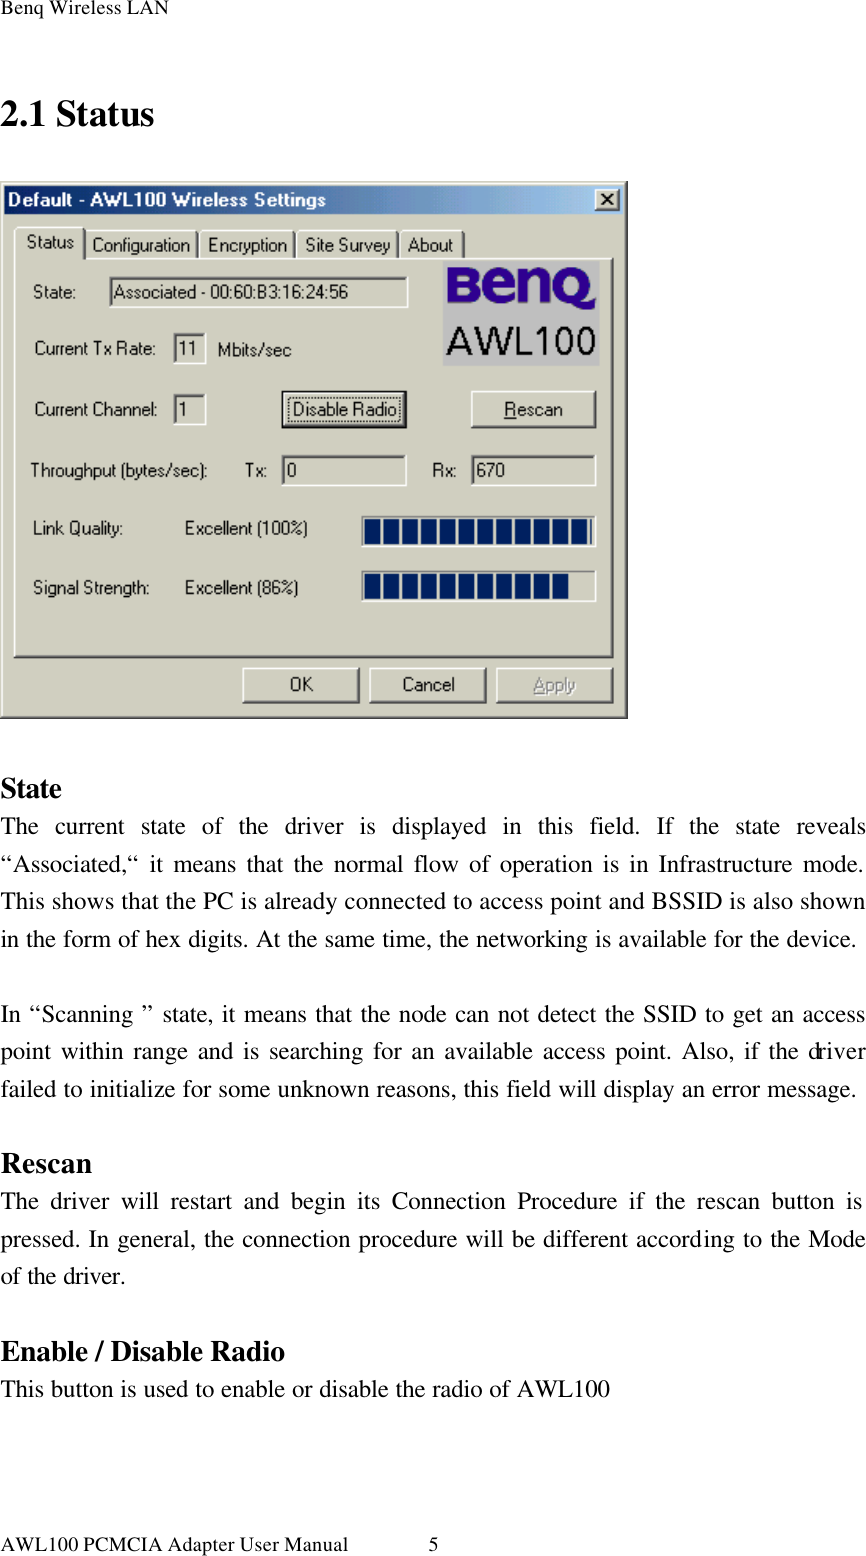 Benq Wireless LAN AWL100 PCMCIA Adapter User Manual 52.1 Status   State The current state of the driver is displayed in this field. If the state reveals “Associated,“ it means that the normal flow of operation is in Infrastructure mode. This shows that the PC is already connected to access point and BSSID is also shown in the form of hex digits. At the same time, the networking is available for the device.  In “Scanning ” state, it means that the node can not detect the SSID to get an access point within range and is searching for an available access point. Also, if the driver failed to initialize for some unknown reasons, this field will display an error message.  Rescan The driver will restart and begin its Connection Procedure if the rescan button is pressed. In general, the connection procedure will be different according to the Mode of the driver.  Enable / Disable Radio This button is used to enable or disable the radio of AWL100  